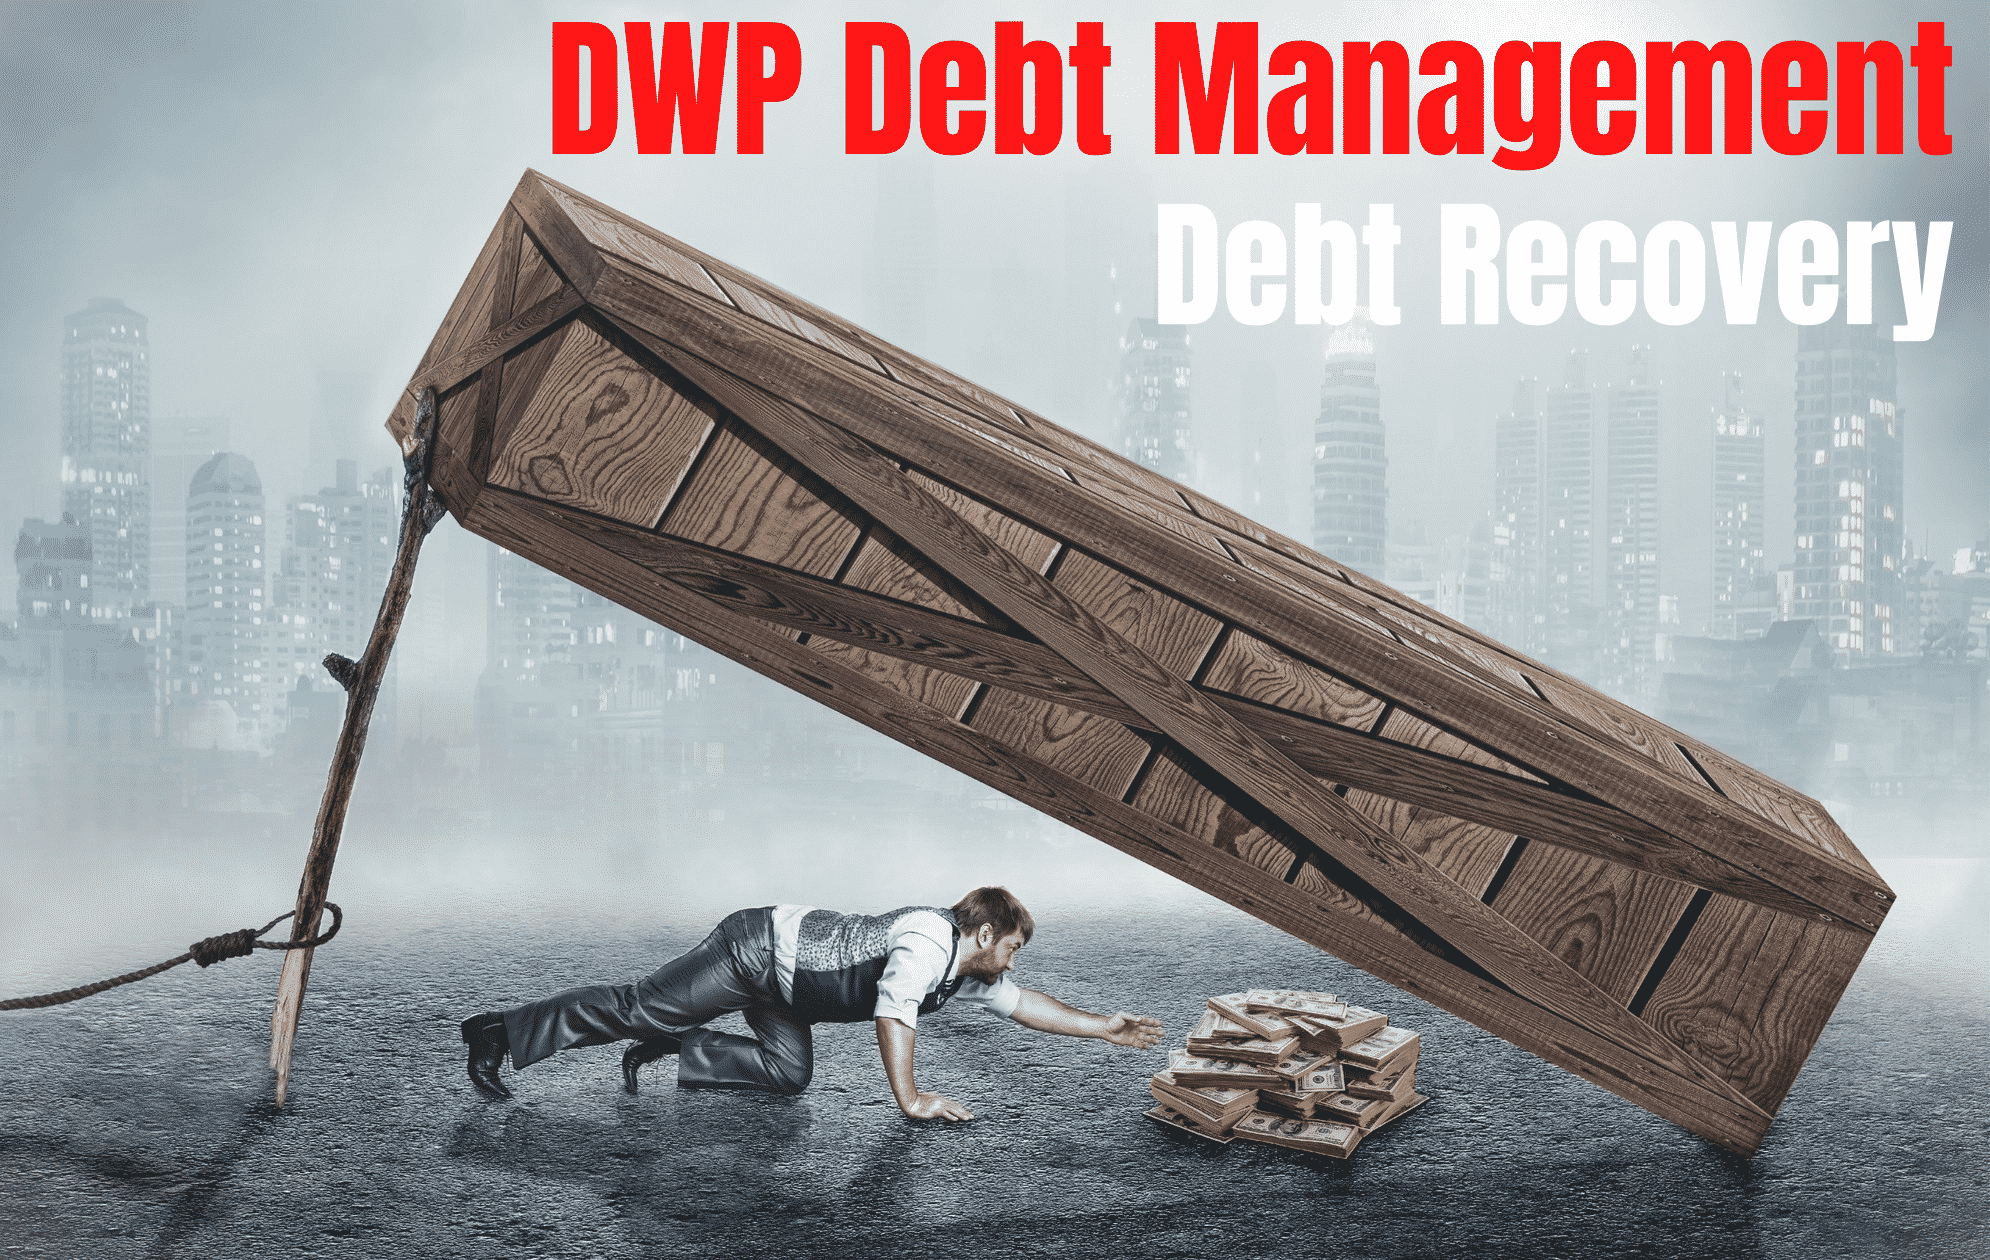 What is DWP debt management & How to Manage It?